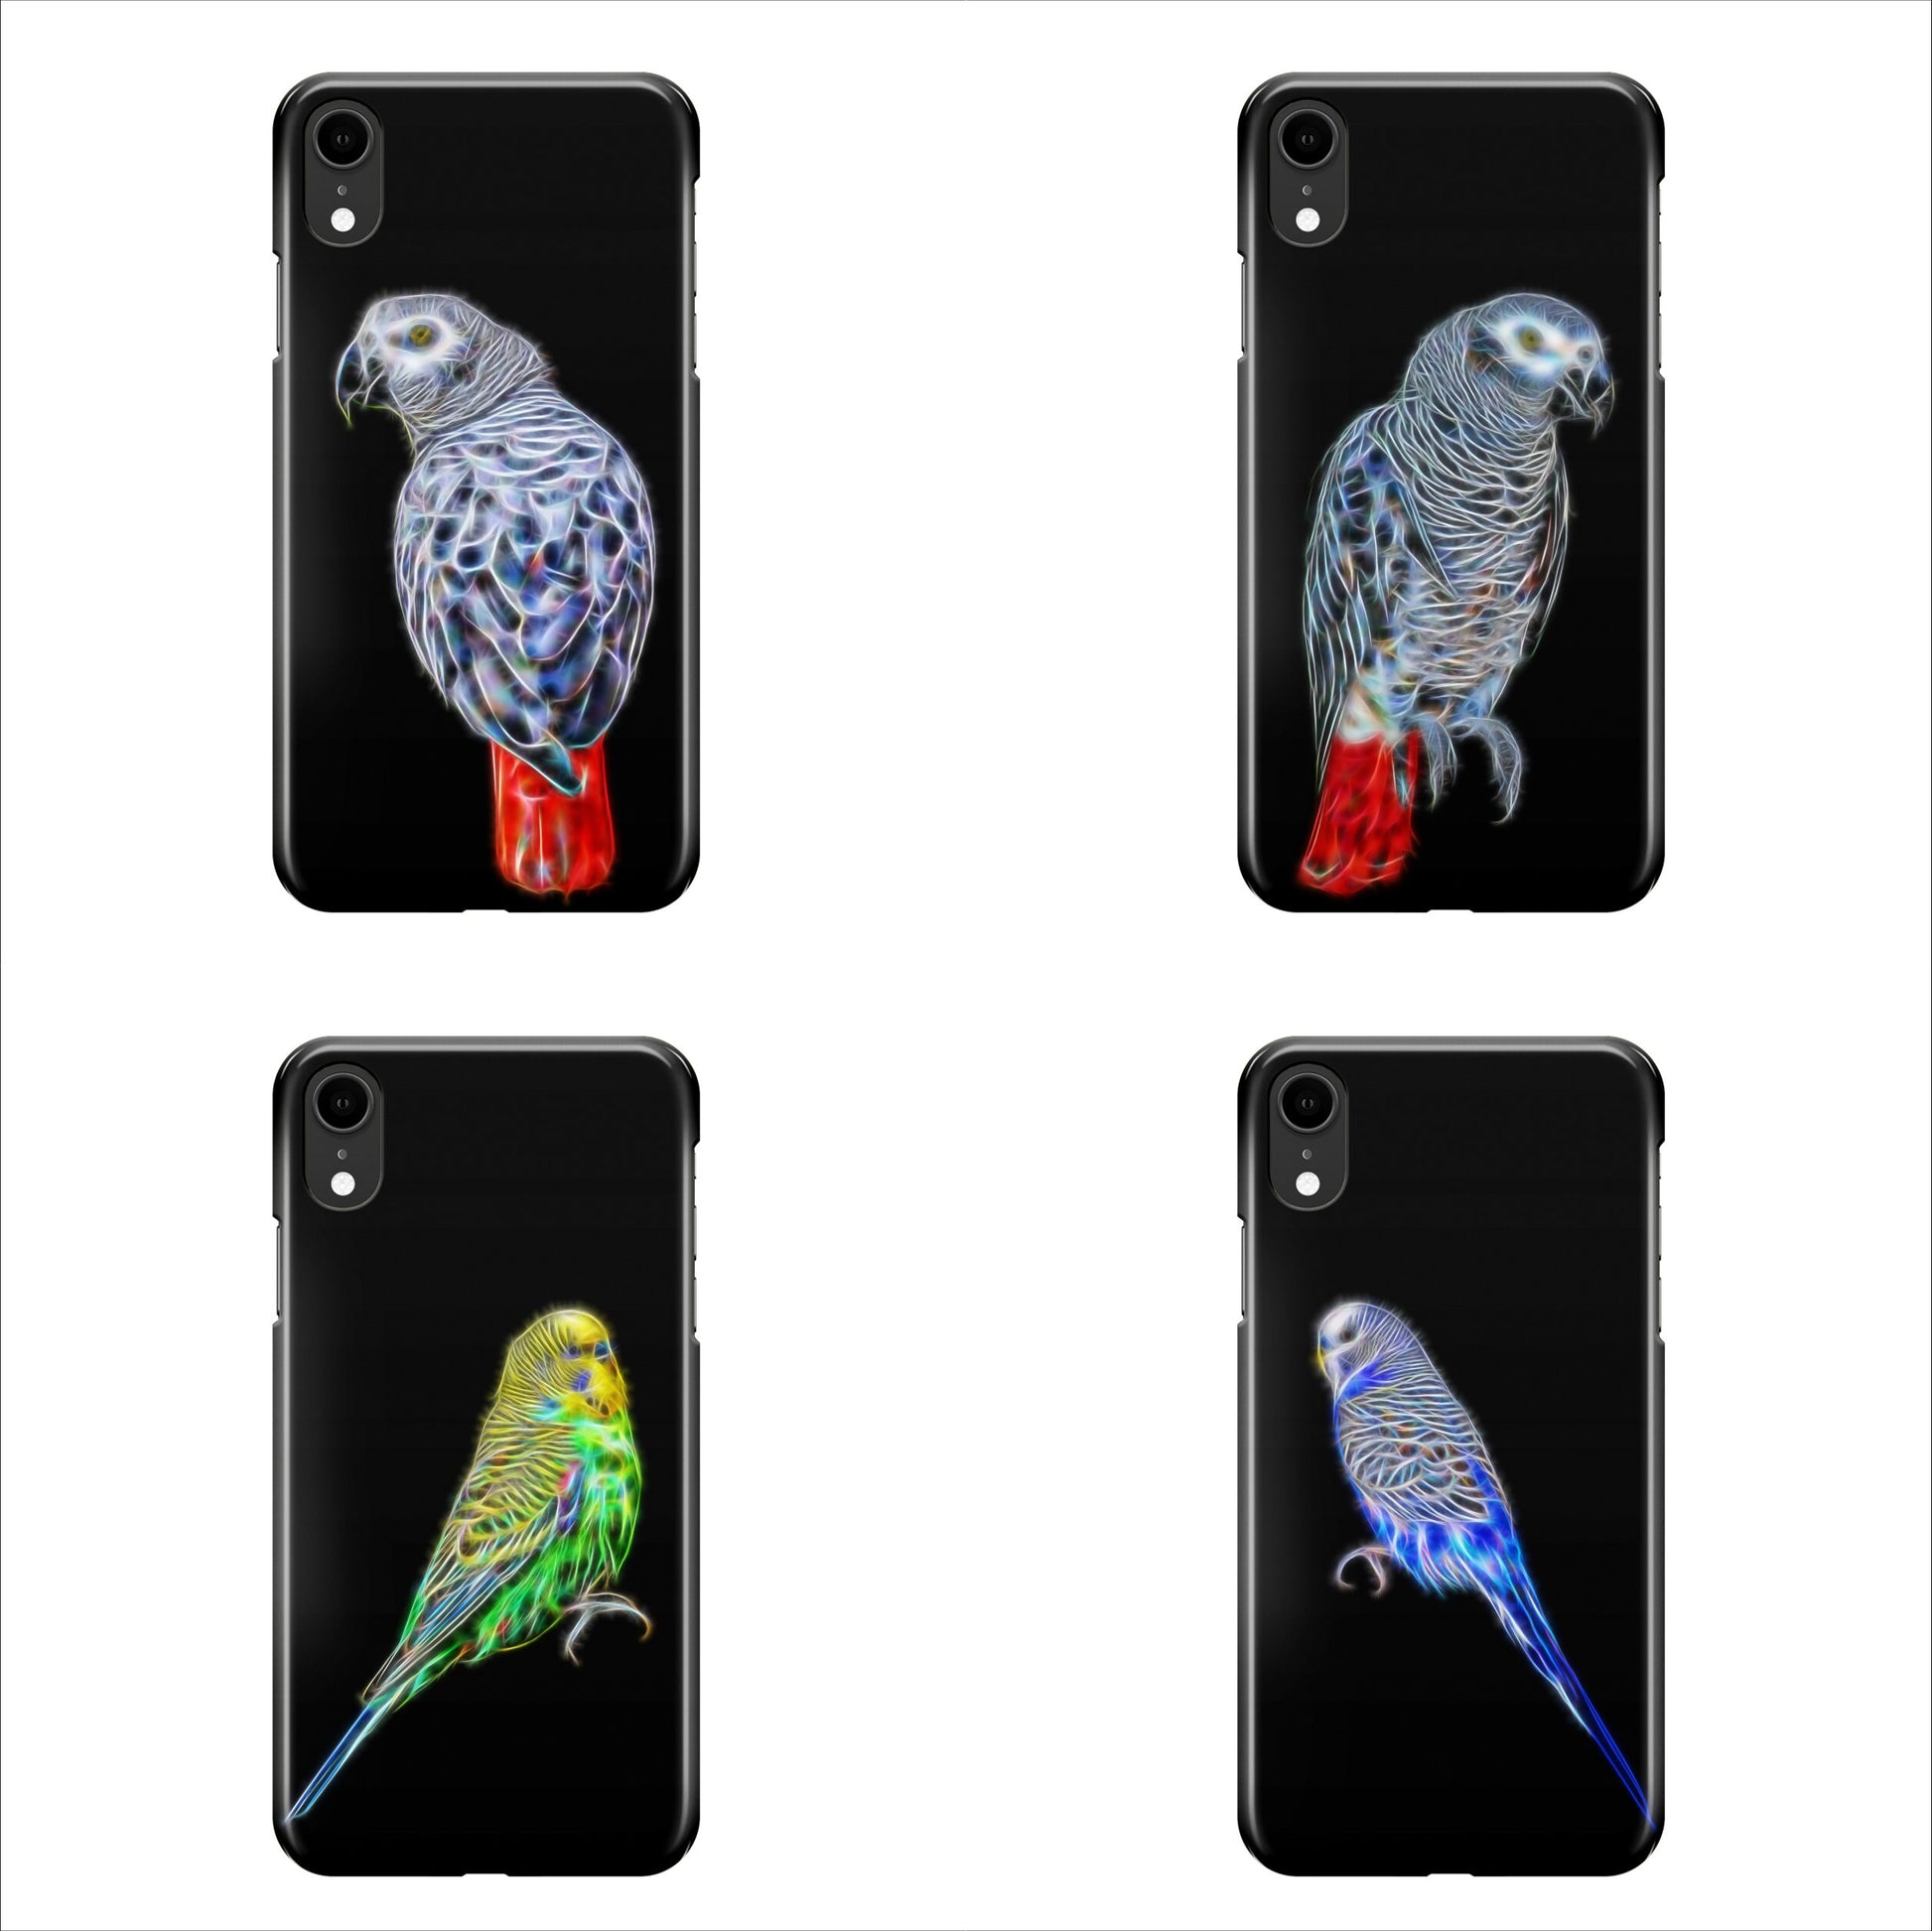 Bird Phone Case with Stunning Fractal Art Design. For Samsung or iPhone. Designs include Parrot Budgie Hawk Finch Eagle Cockatiel and more